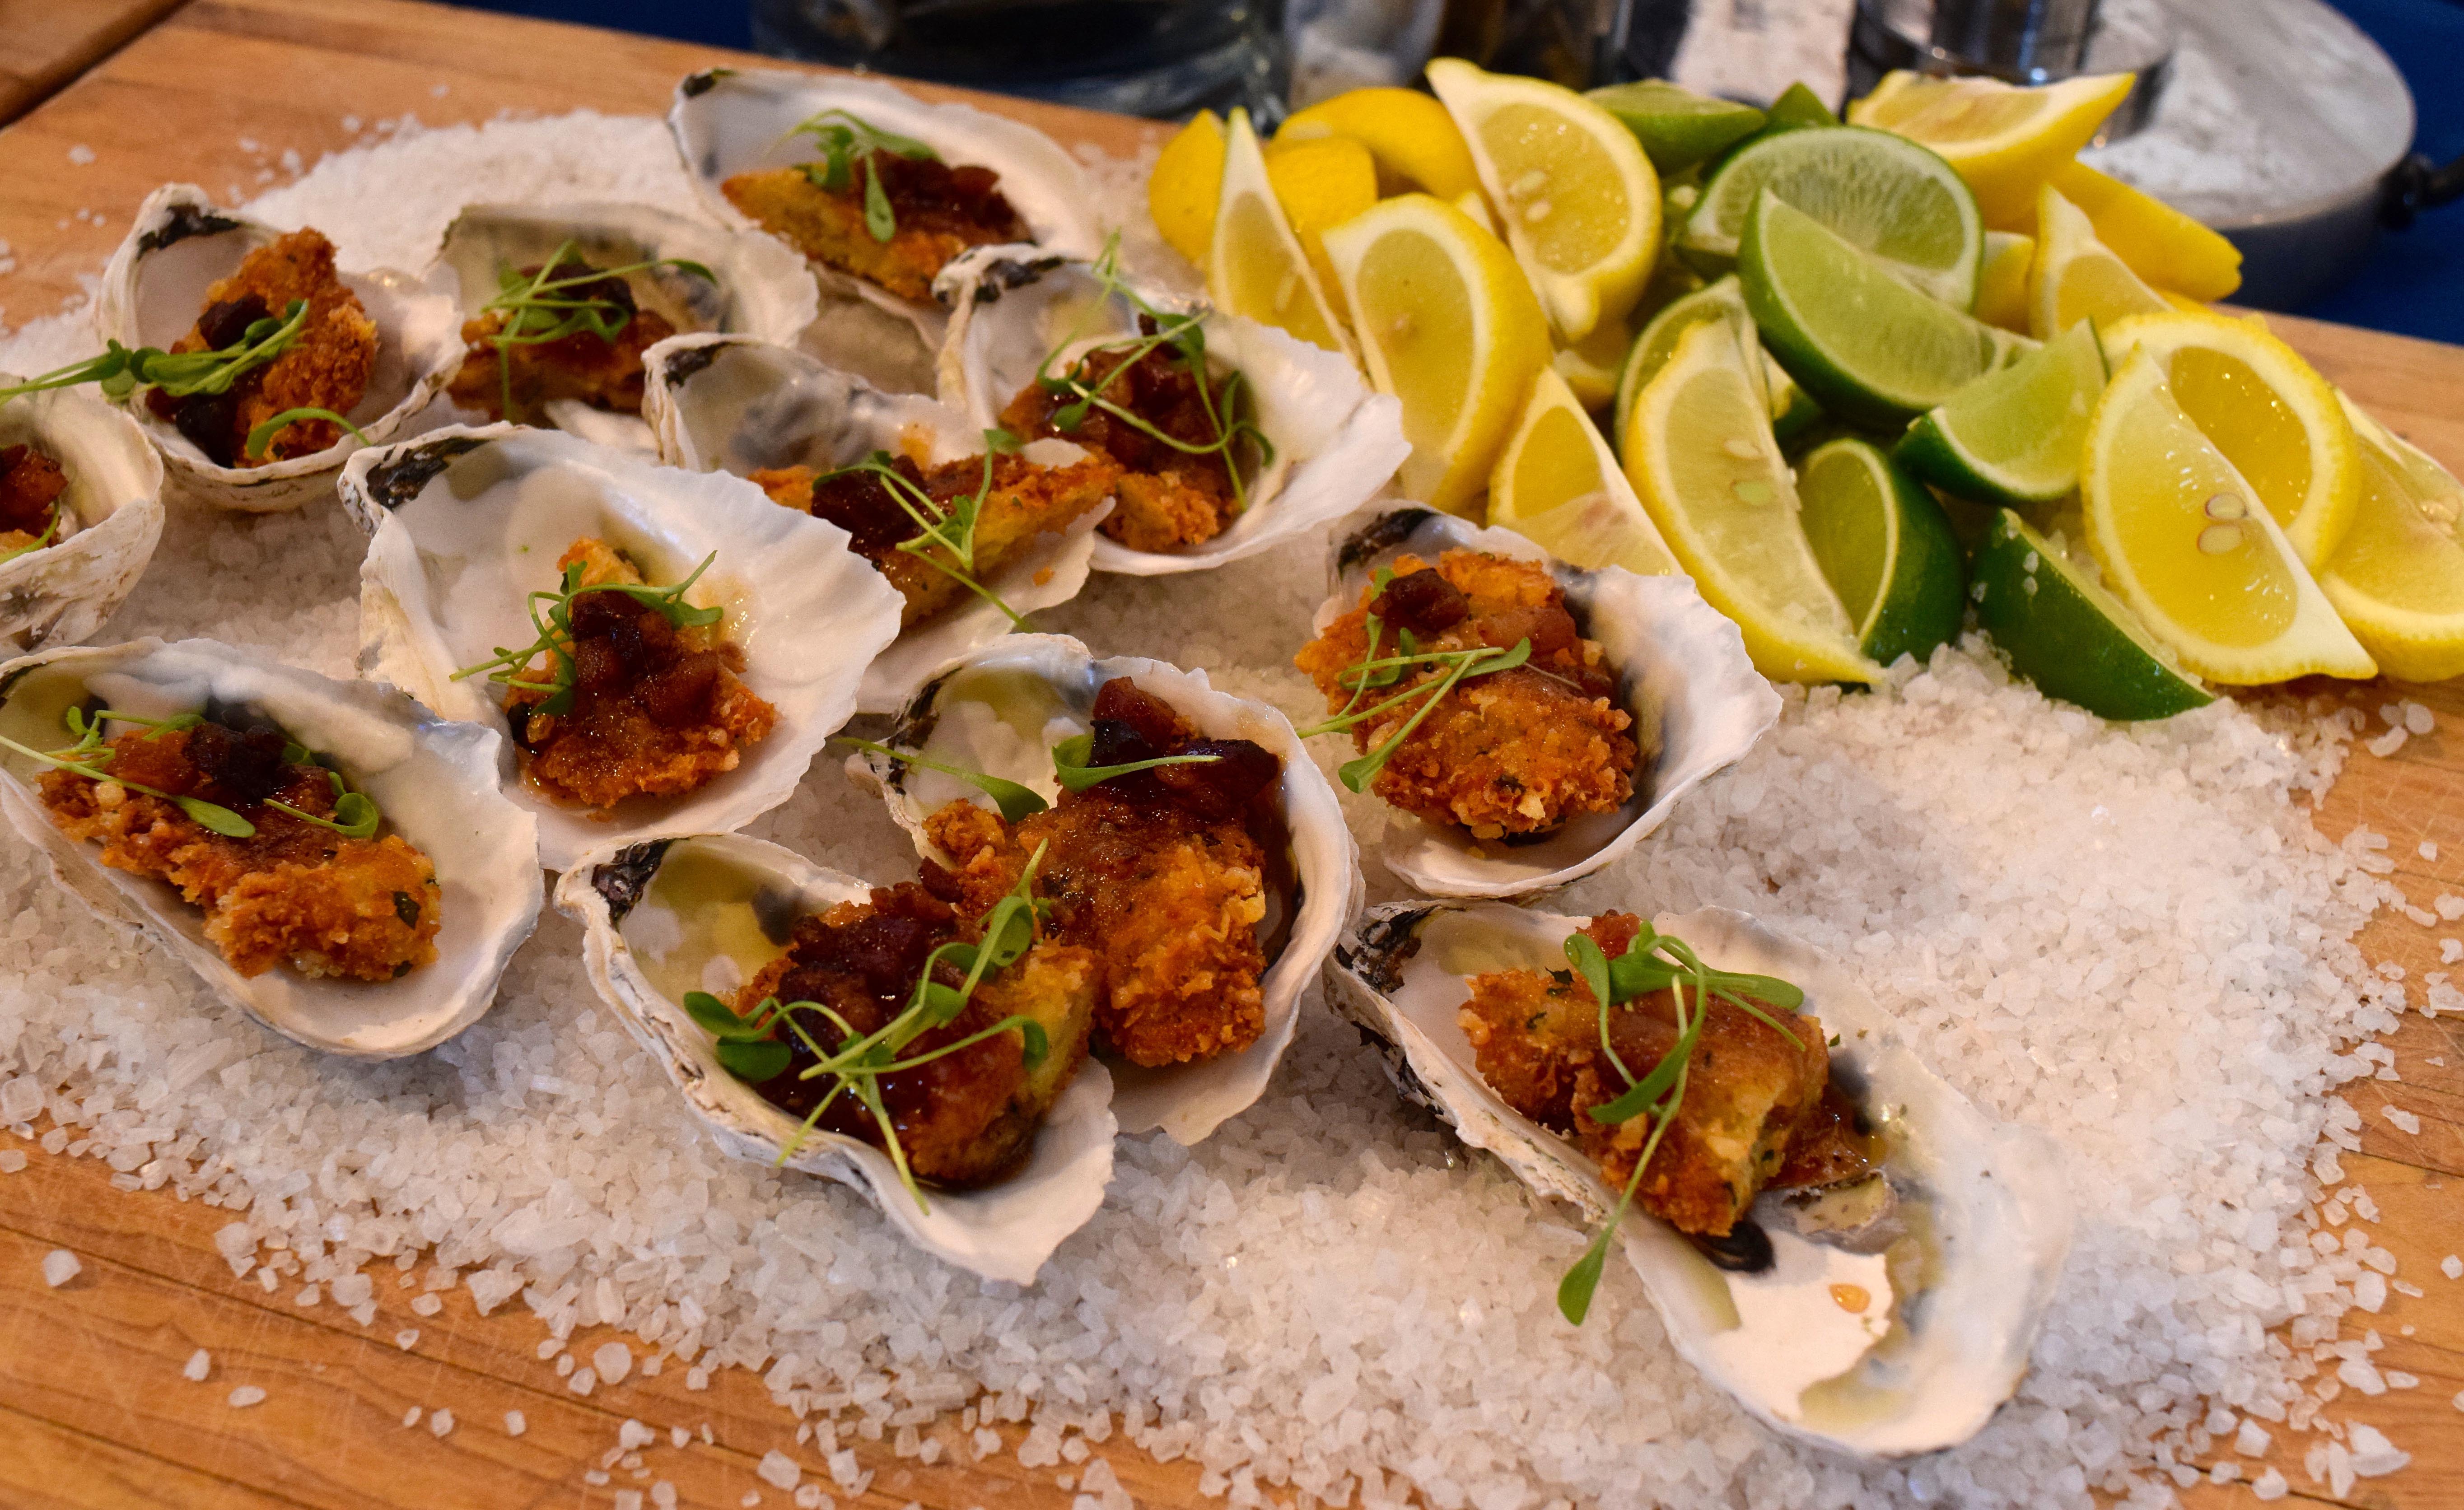 People Choice - Competition for the Best Oyster Dish